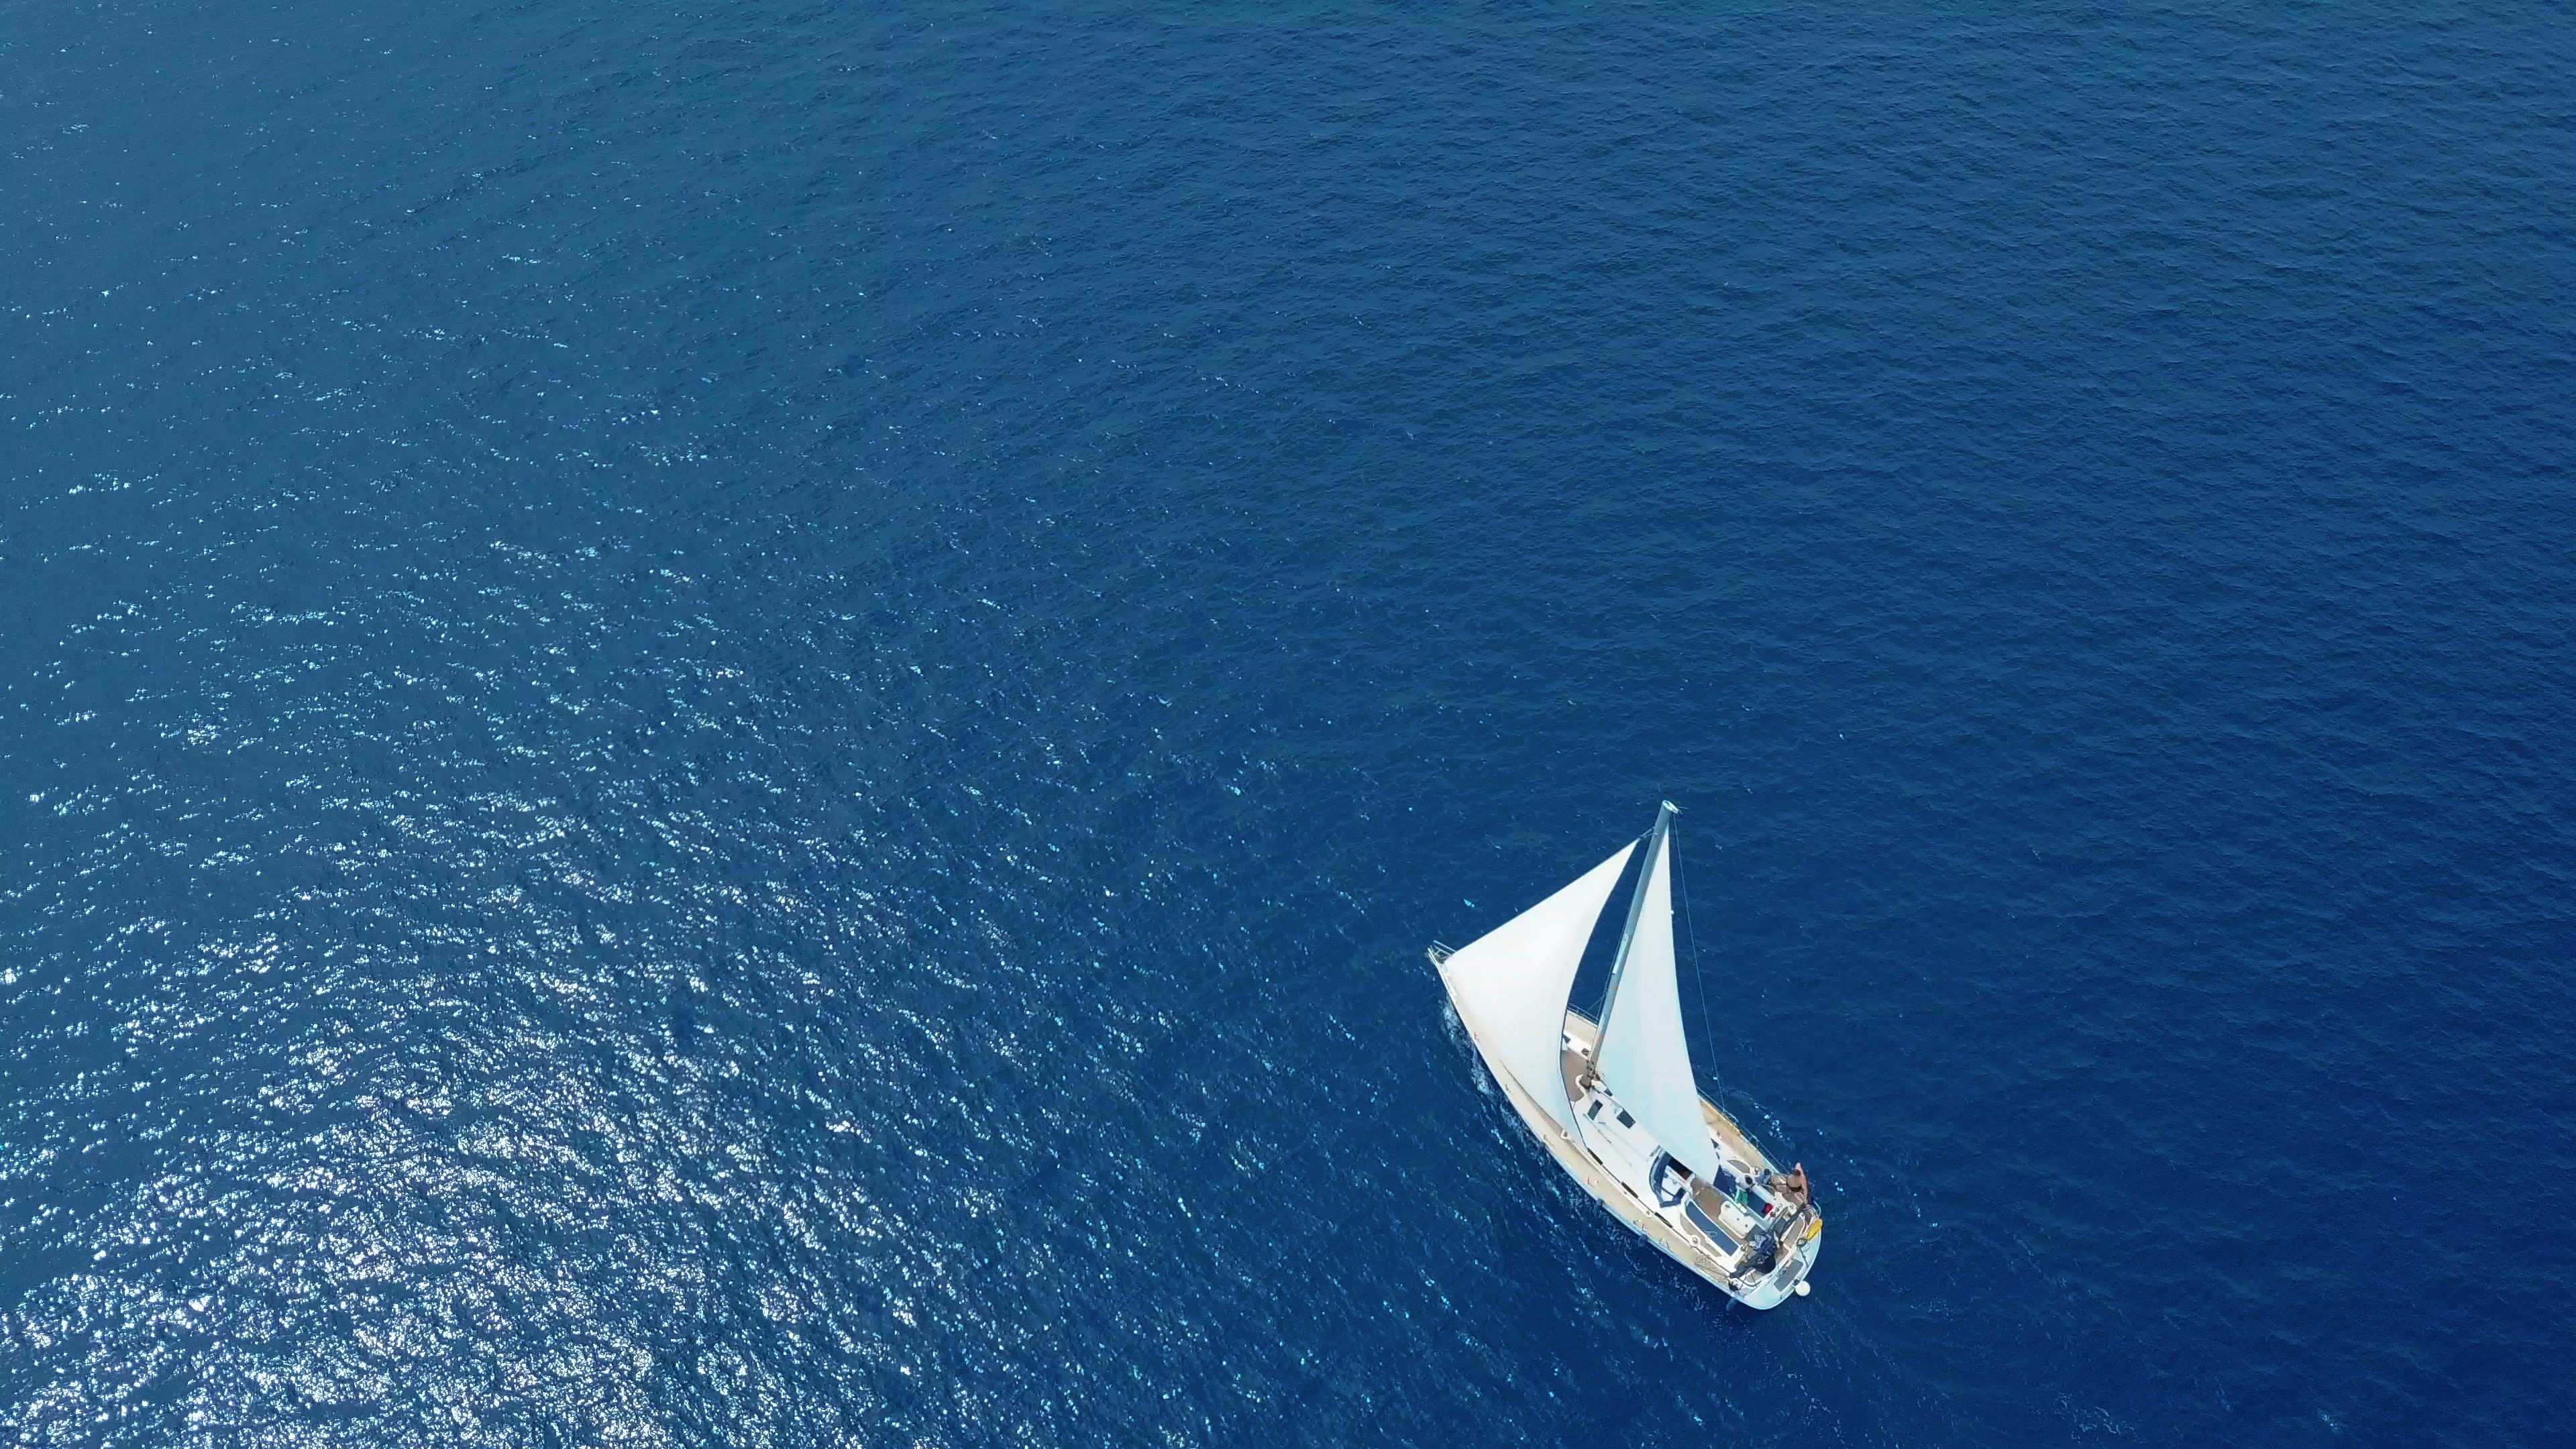 Sail boat travels, Yachting adventure, Drone footage, Open sea sailing, 3840x2160 4K Desktop